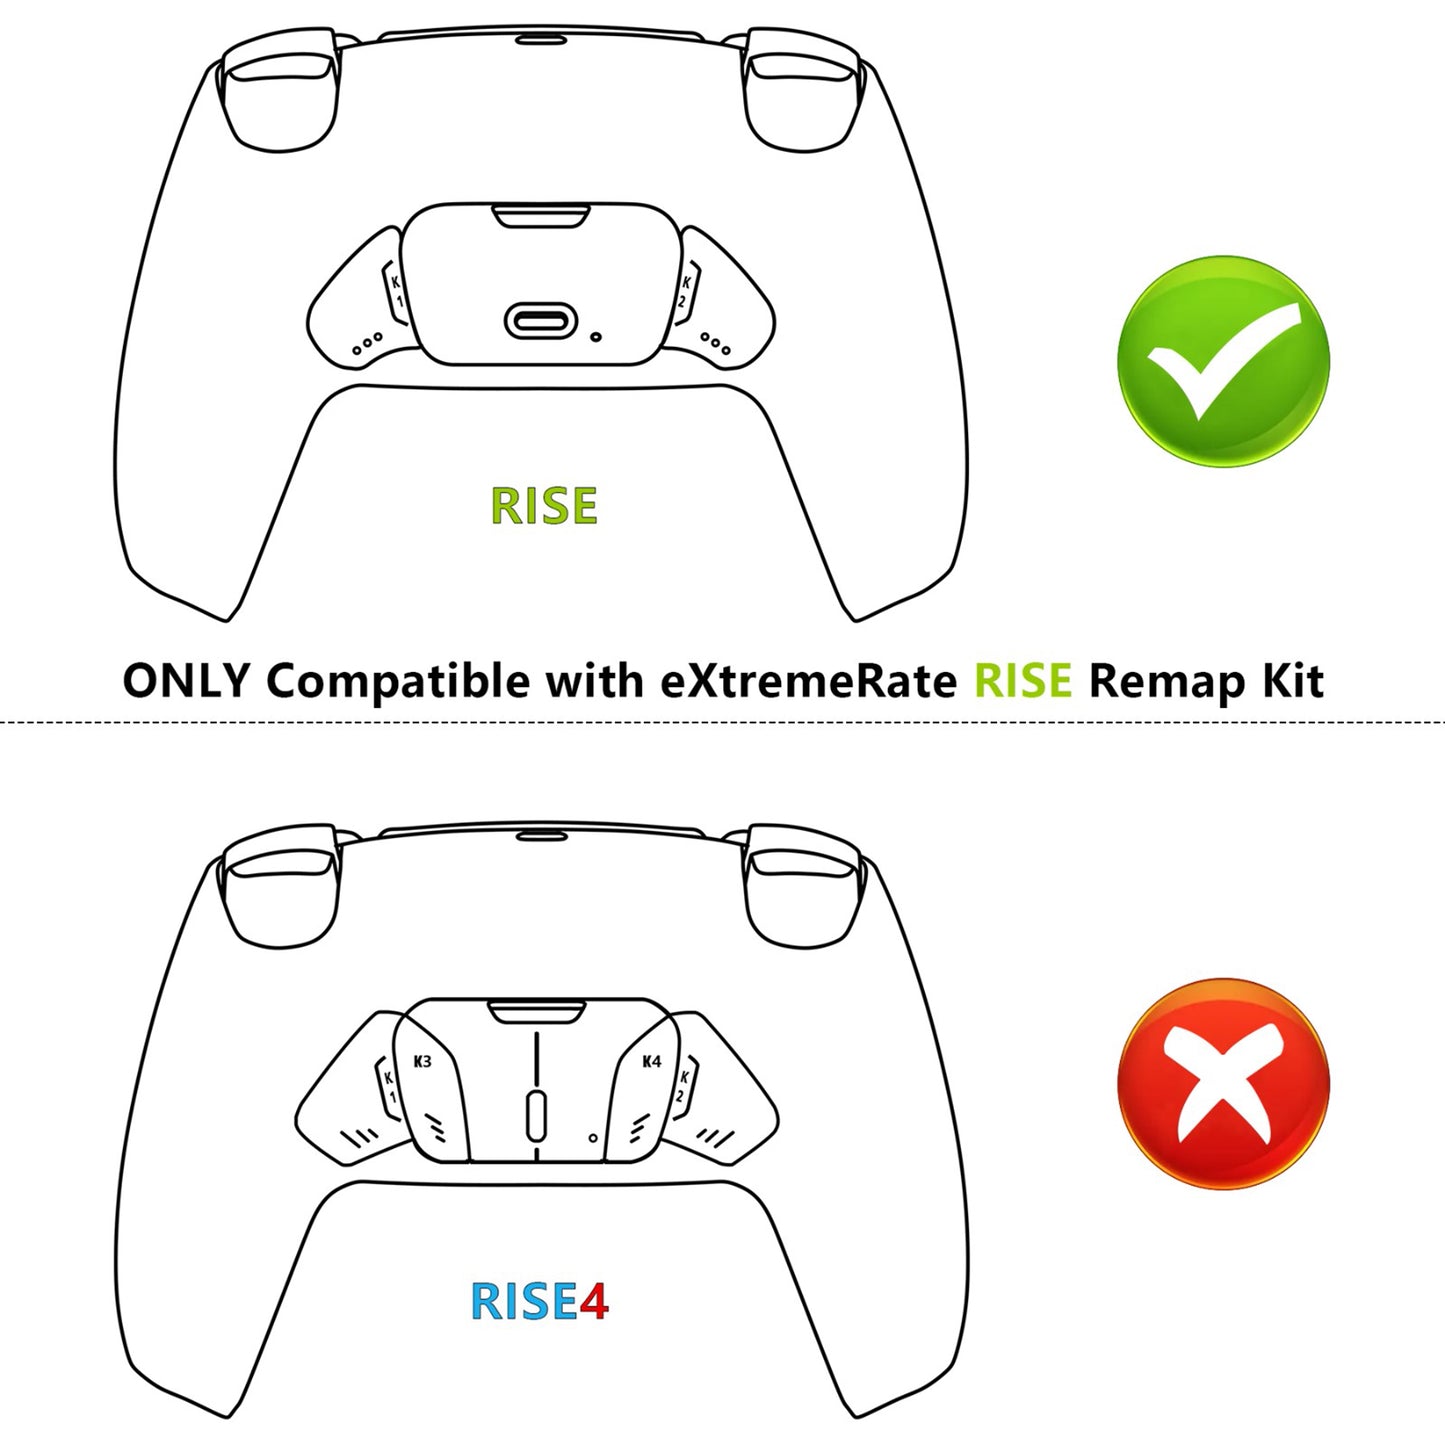 eXtremeRate Real Metal Buttons (RMB) Version Redesigned K1 K2 Back Buttons & Remap PCB Board for eXtremerate RISE Remap Kit, Compatible with PS5 Controller - Black eXtremeRate